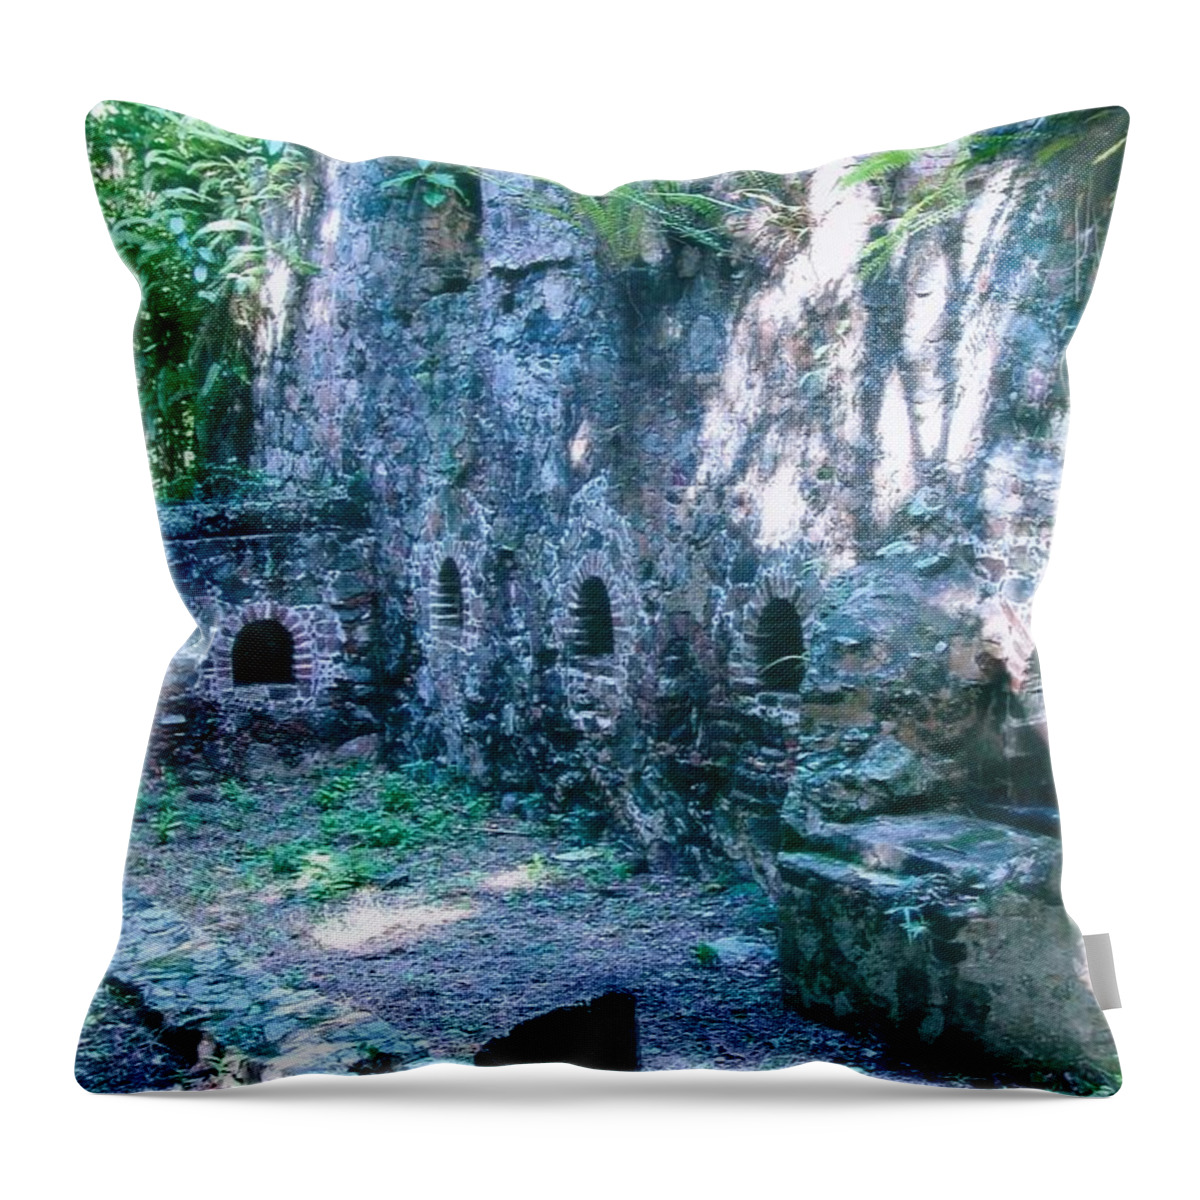 Cinnamon Bay Throw Pillow featuring the photograph Sugar Mill Ruins by Robert Nickologianis